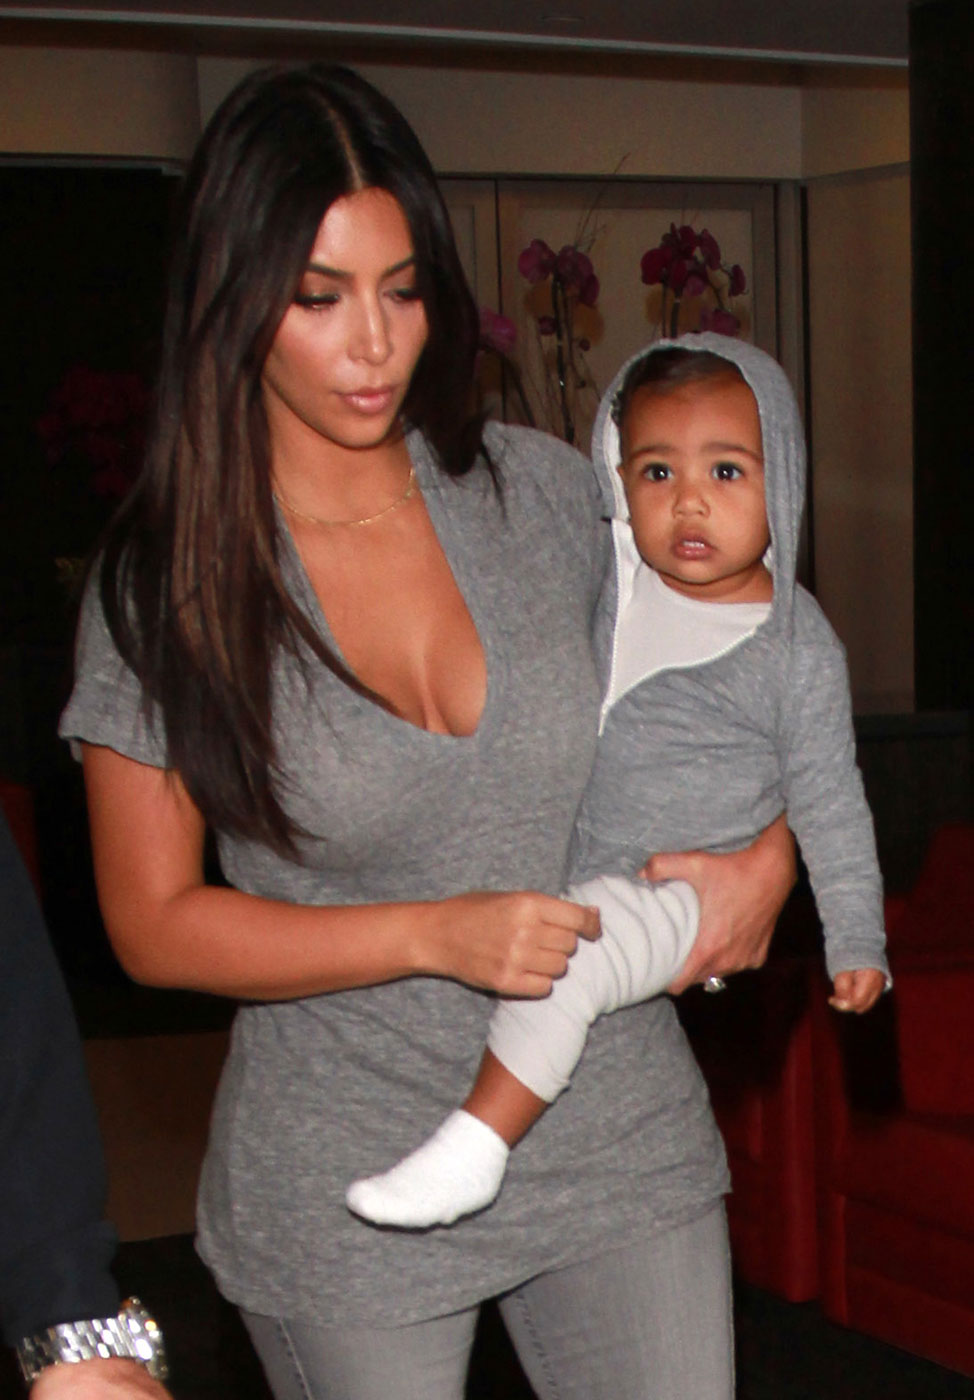 Kim Kardashian takes baby North West on a late night flight from LAX Airport in Los Angeles, CA, on August 10, 2014.